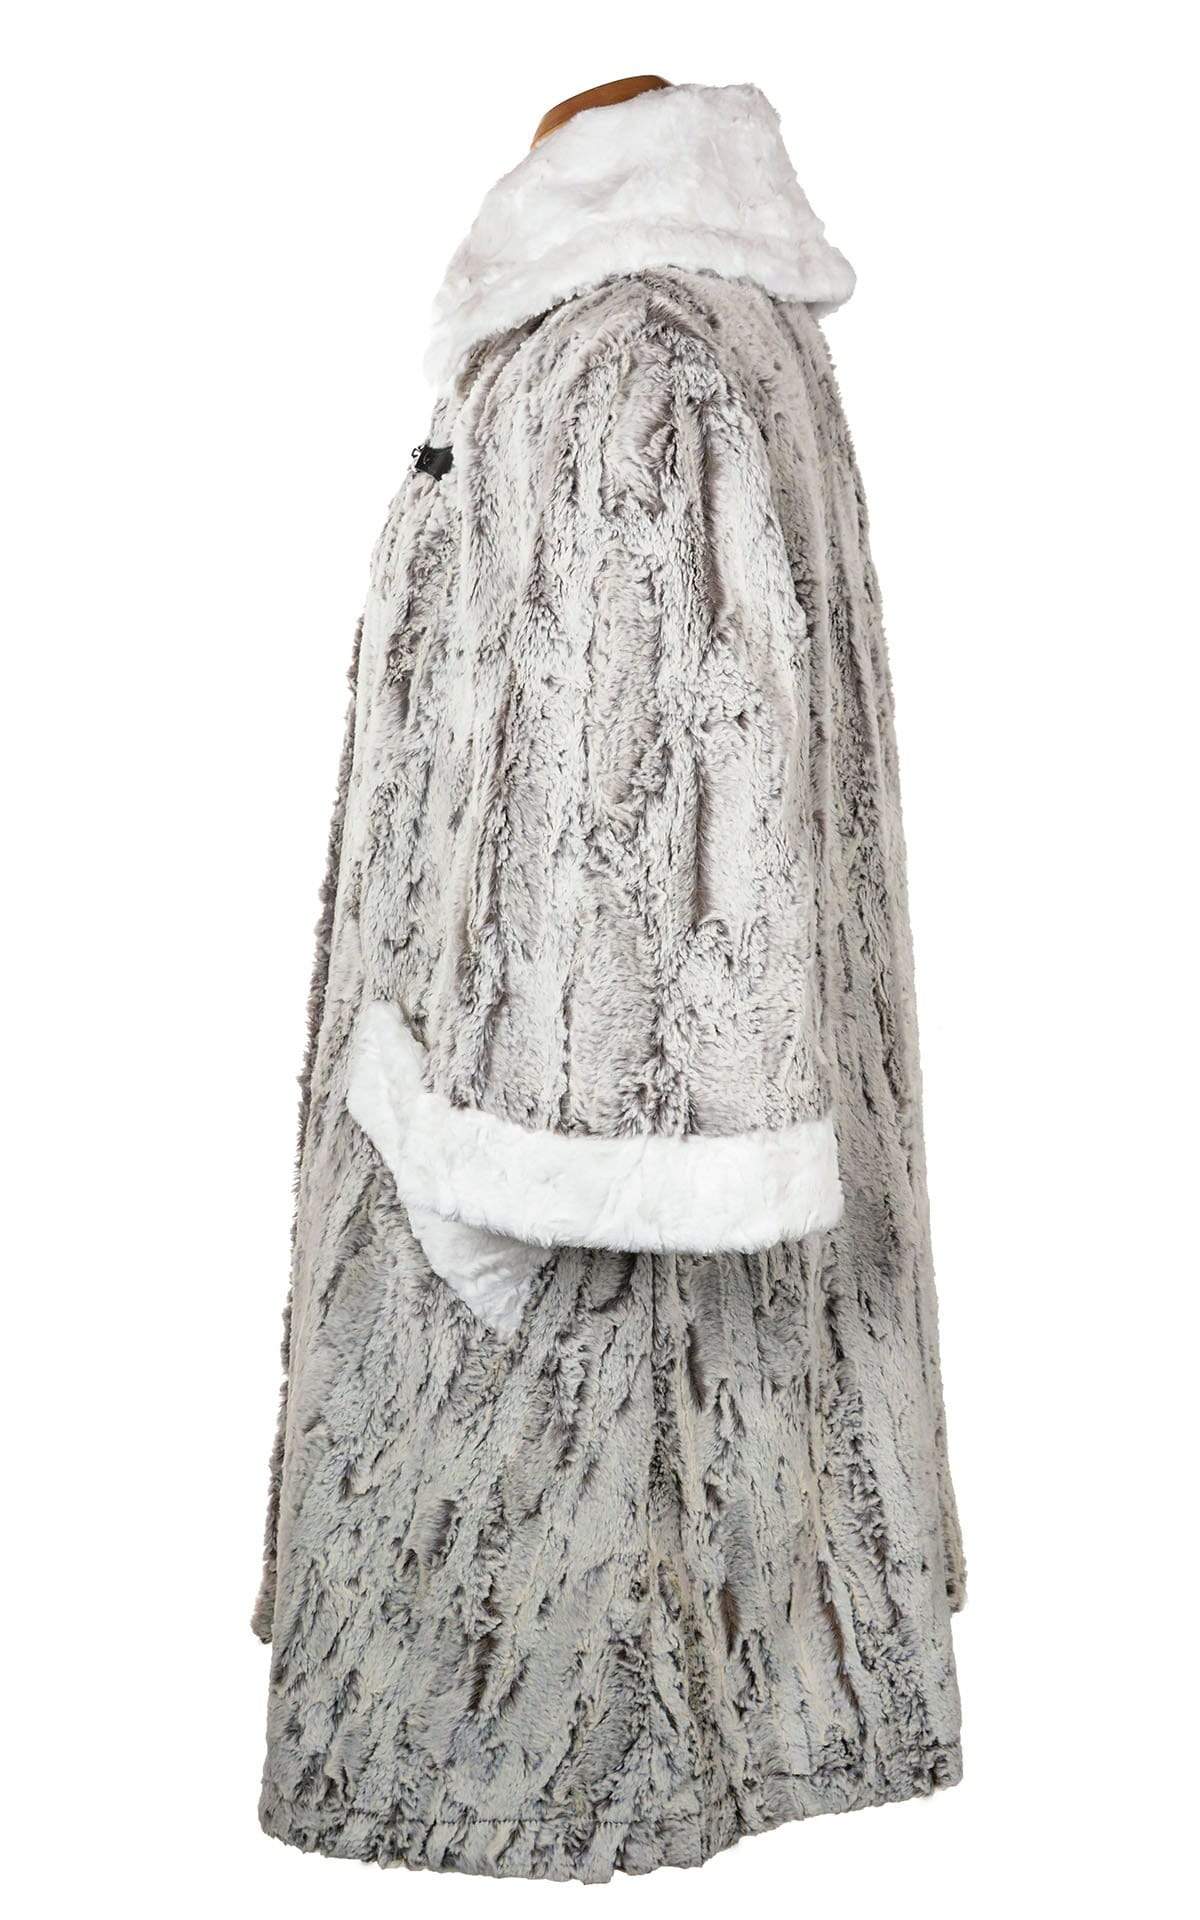 Crawford Coat - Luxury Faux Fur in Khaki with Cuddly Fur in Ivory (One Large Left!)